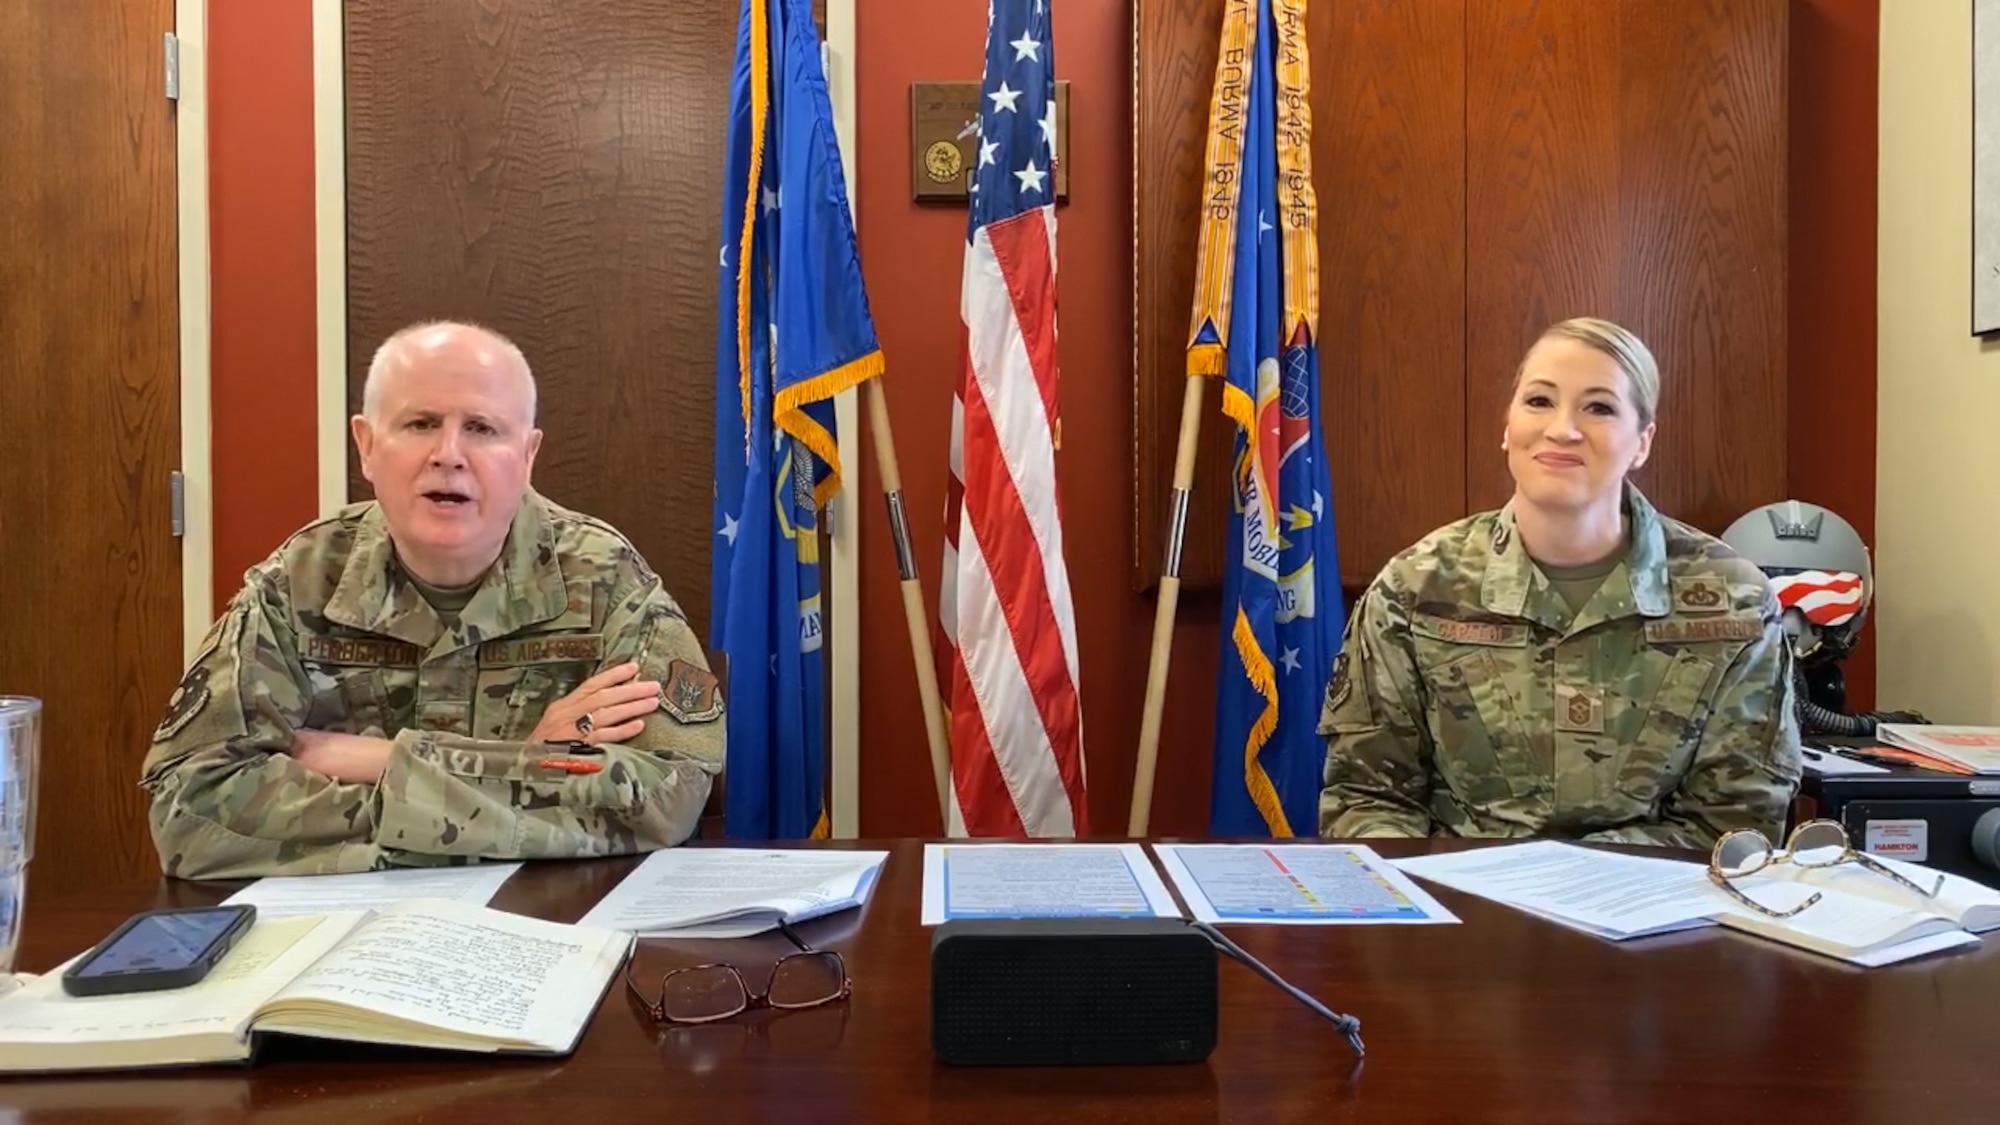 Col. Thomas O. Pemberton, 514th Air Mobility Wing commander, conducted a Facebook Live event on Sunday, March 24, 2020, which counted as credit for an hour of the UTA.  He gathered his command chief, group commanders and a few subject matter experts who answered questions.